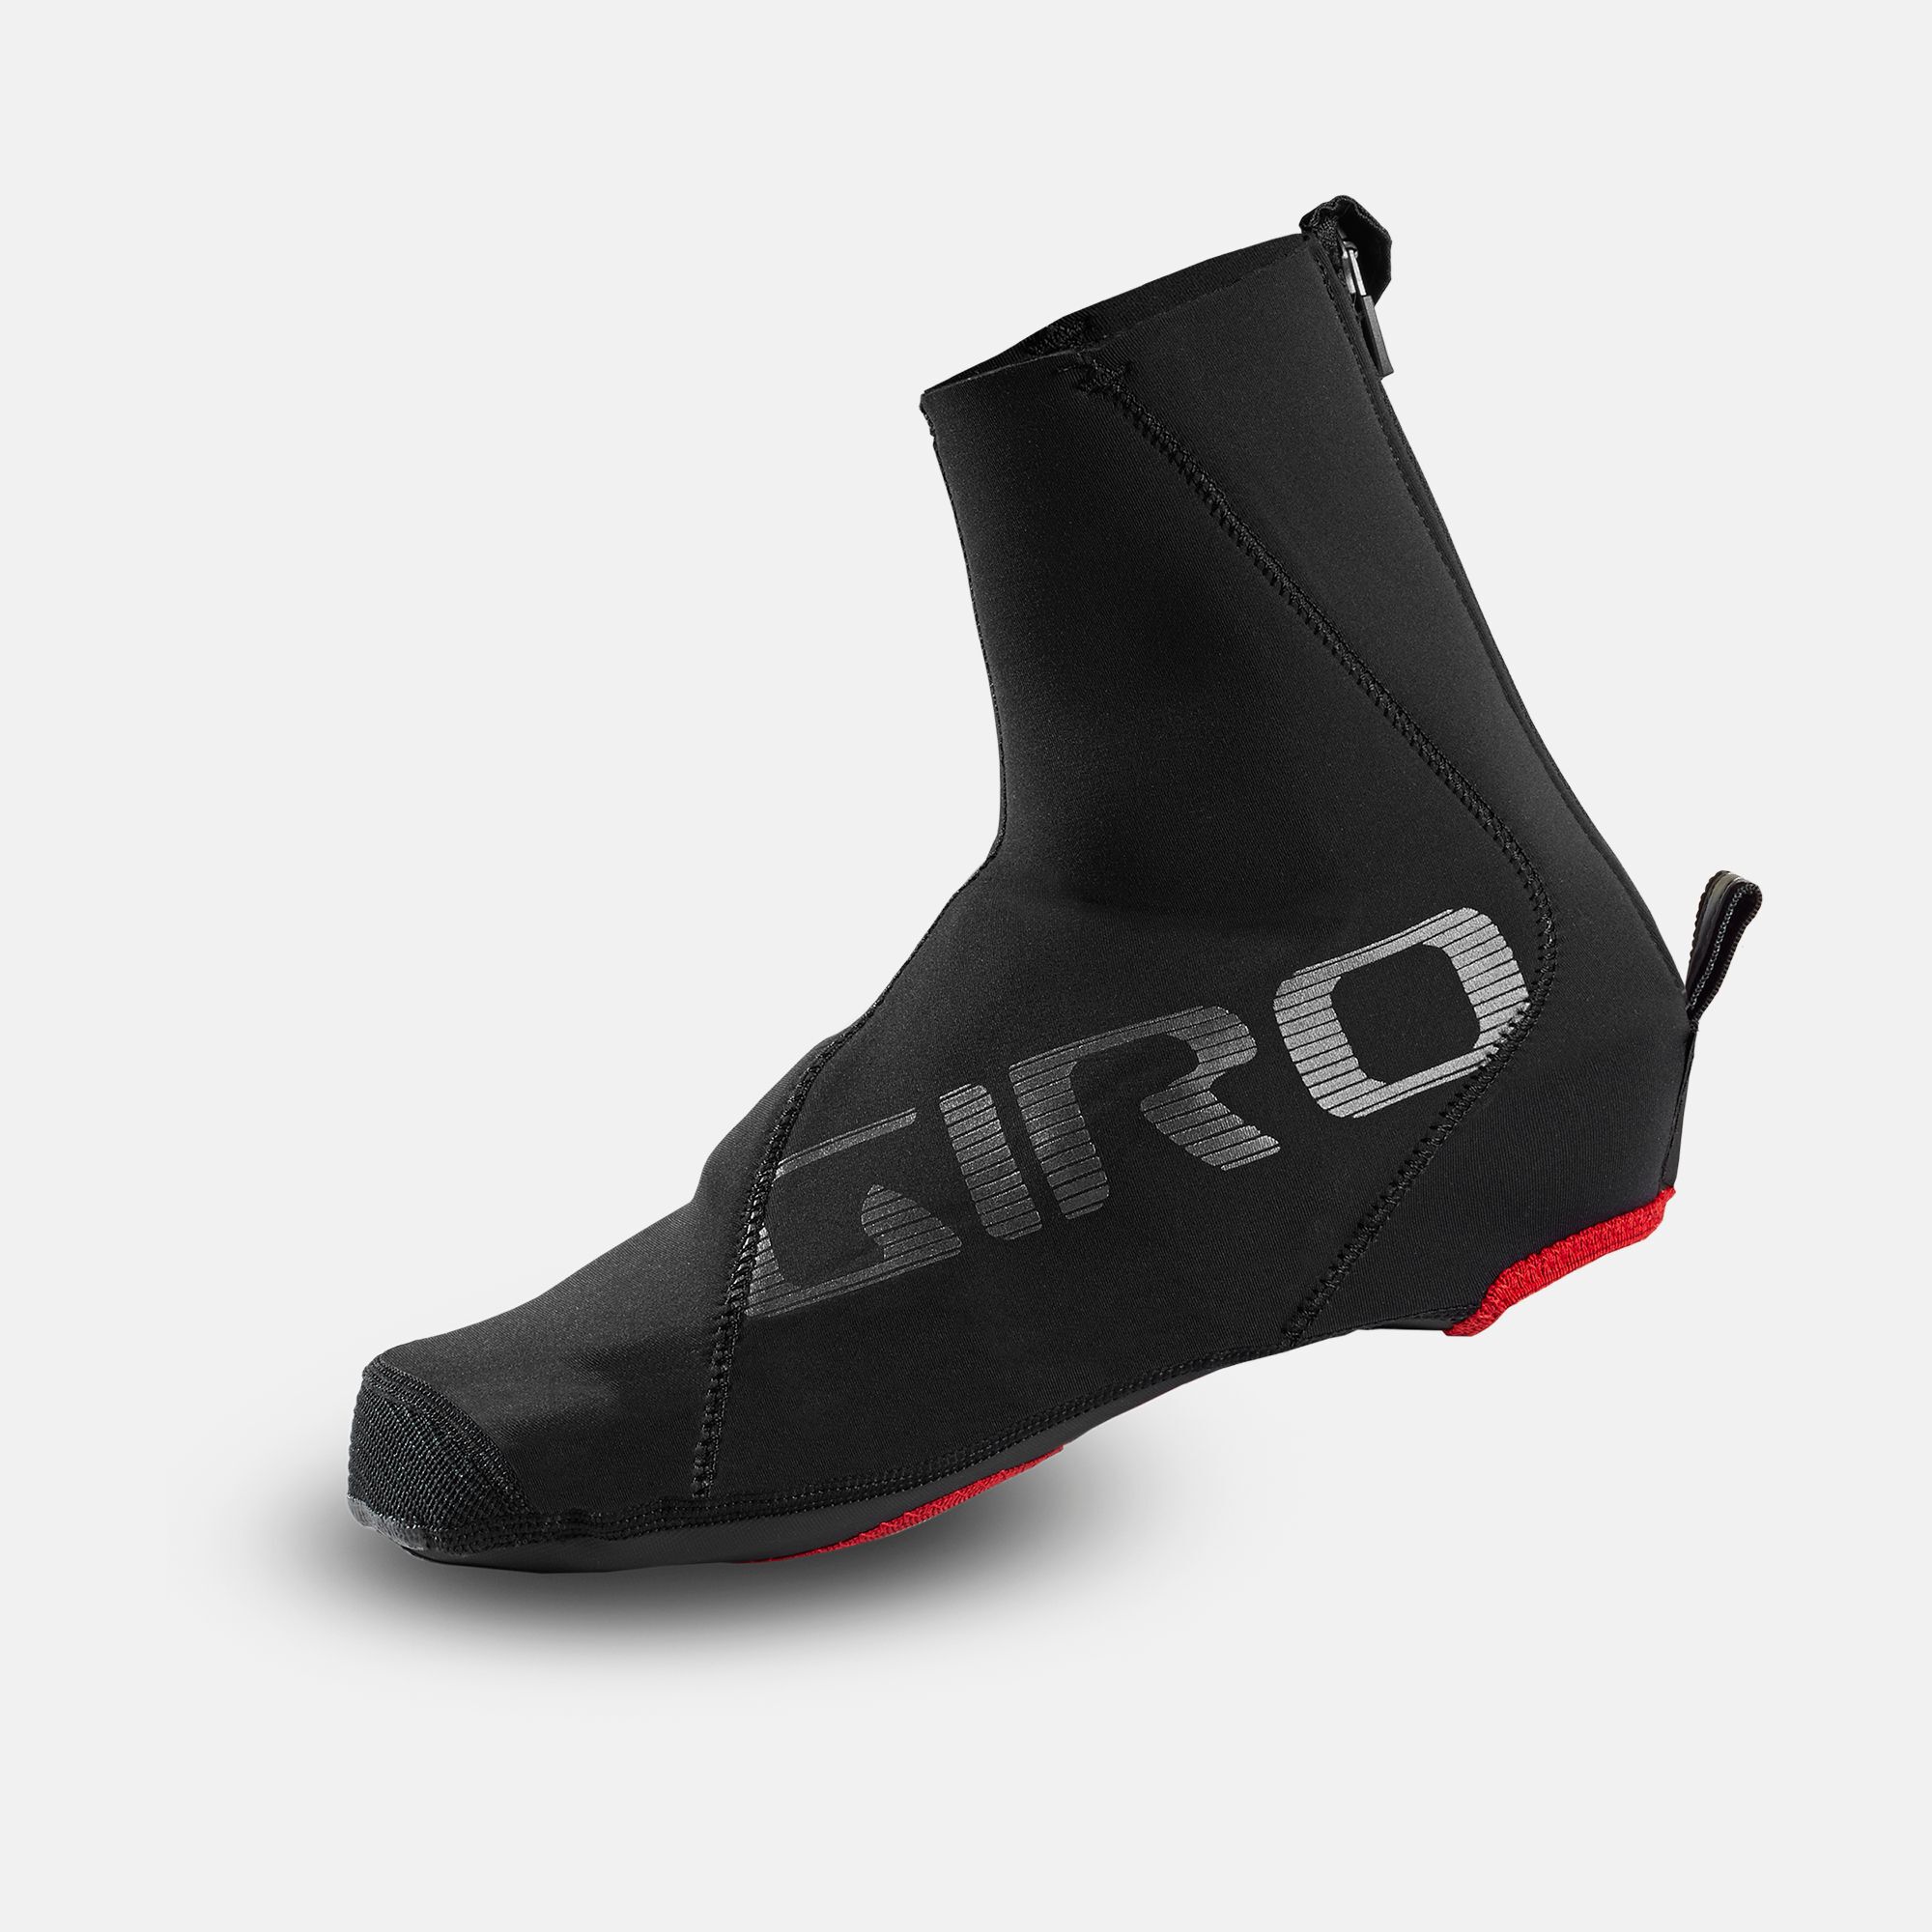 bicycle shoe covers winter